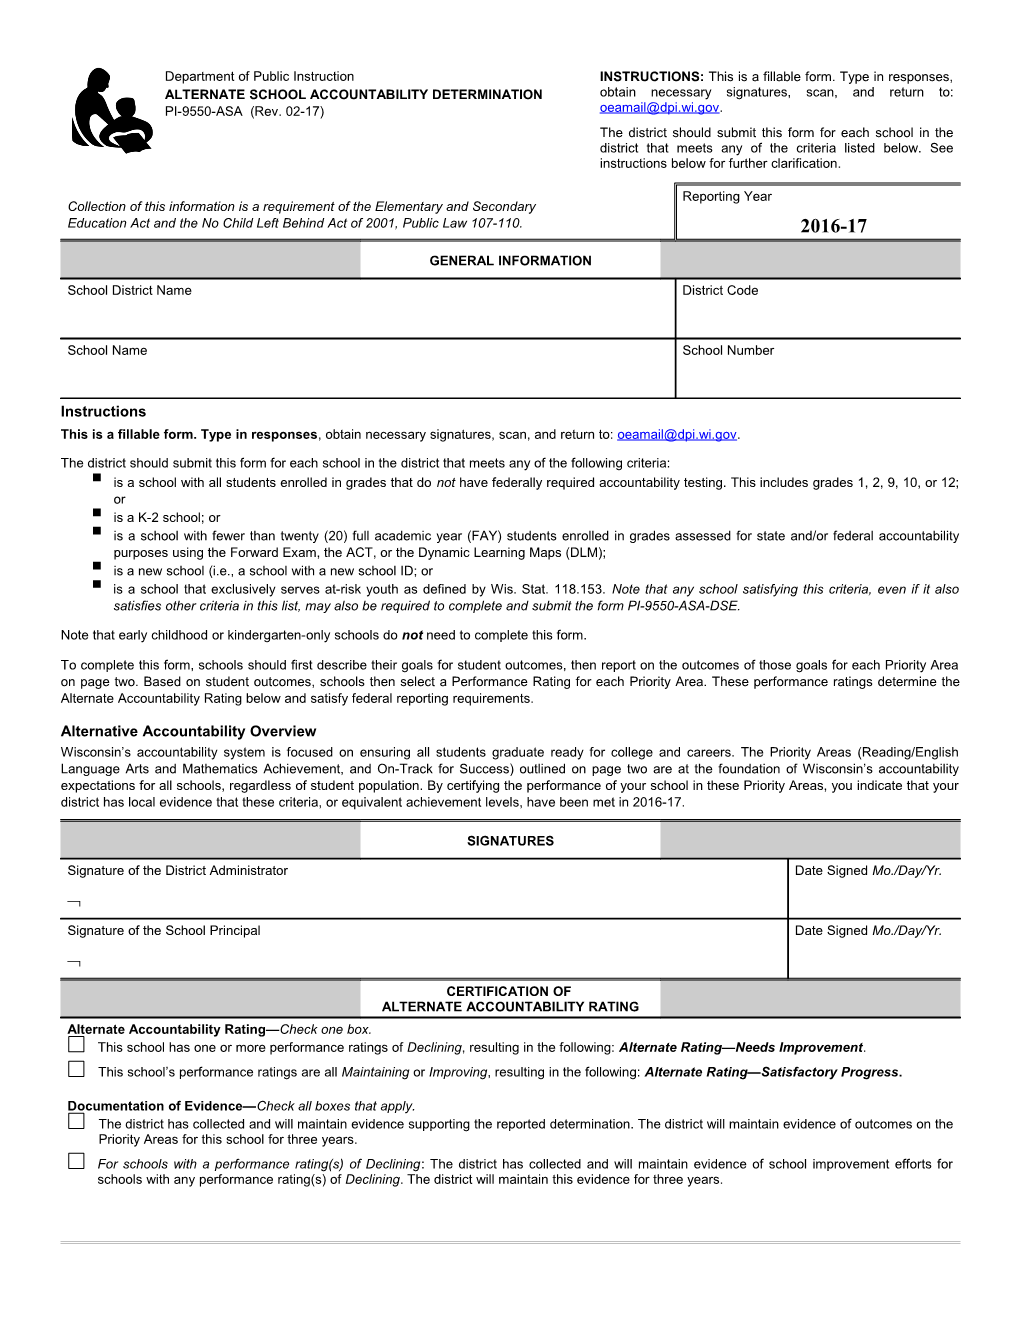 This Is a Fillable Form. Type in Responses , Obtain Necessary Signatures, Scan, and Return